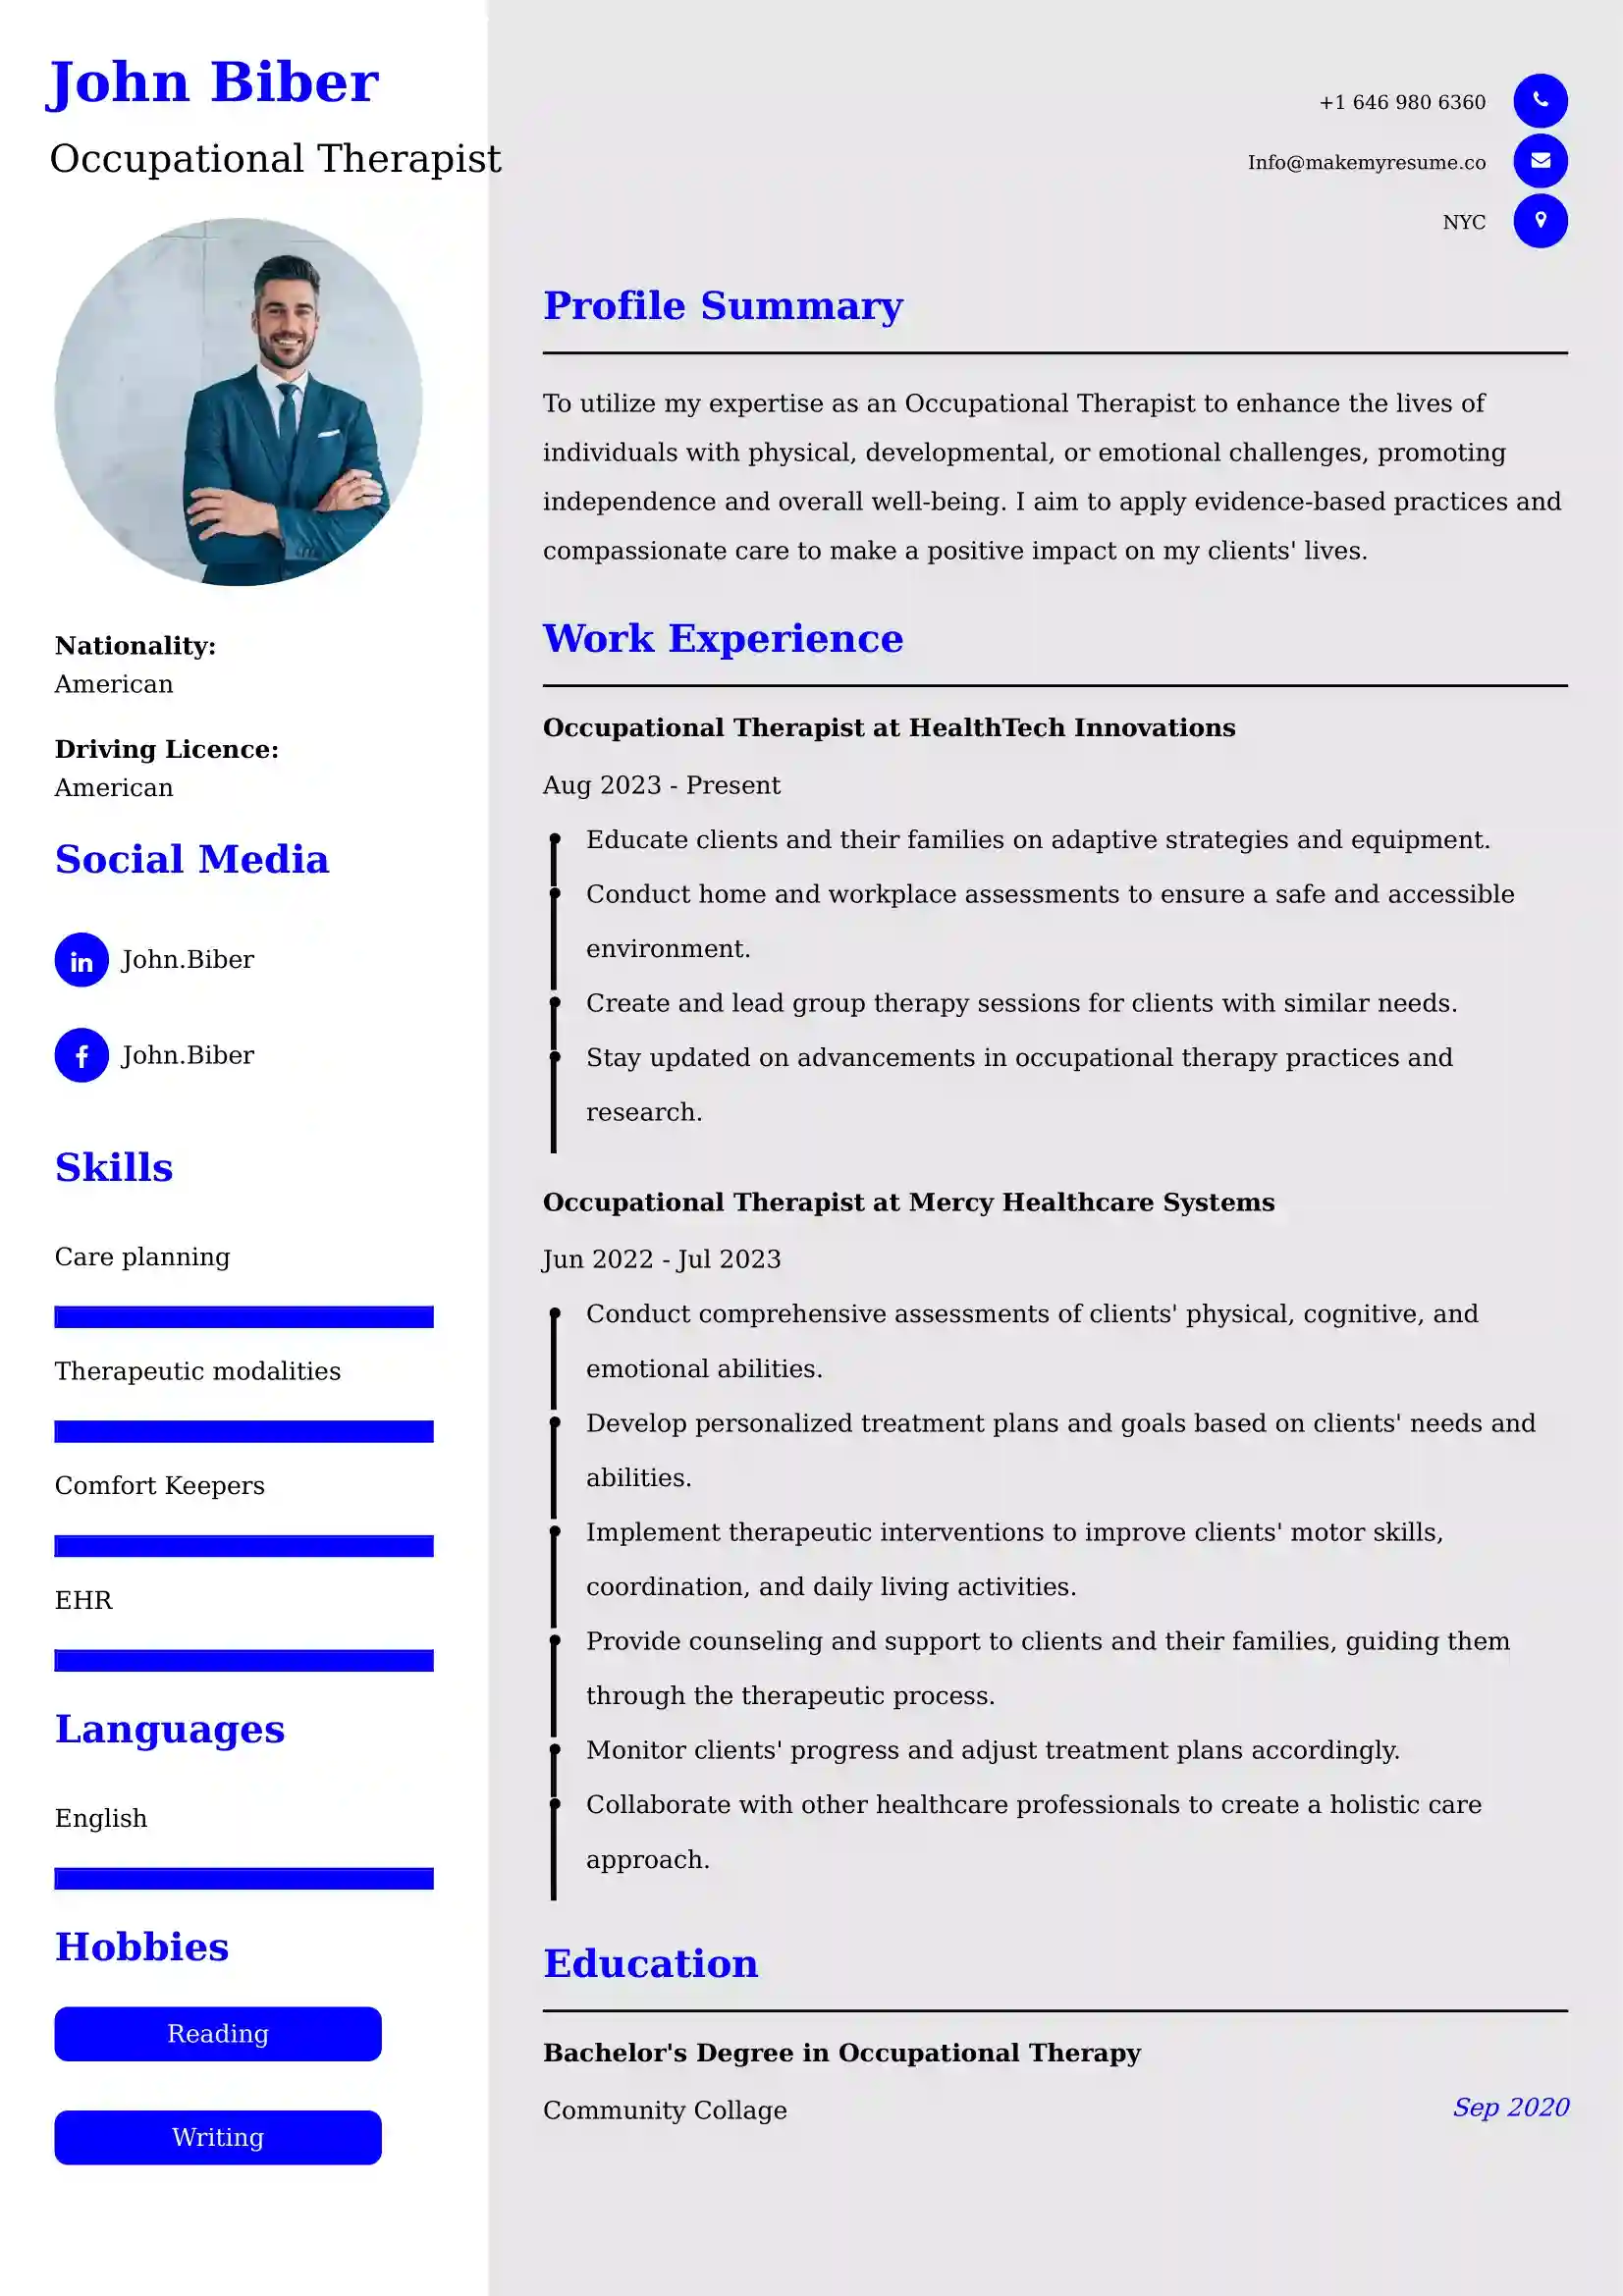 Occupational Therapist CV Examples - US Format